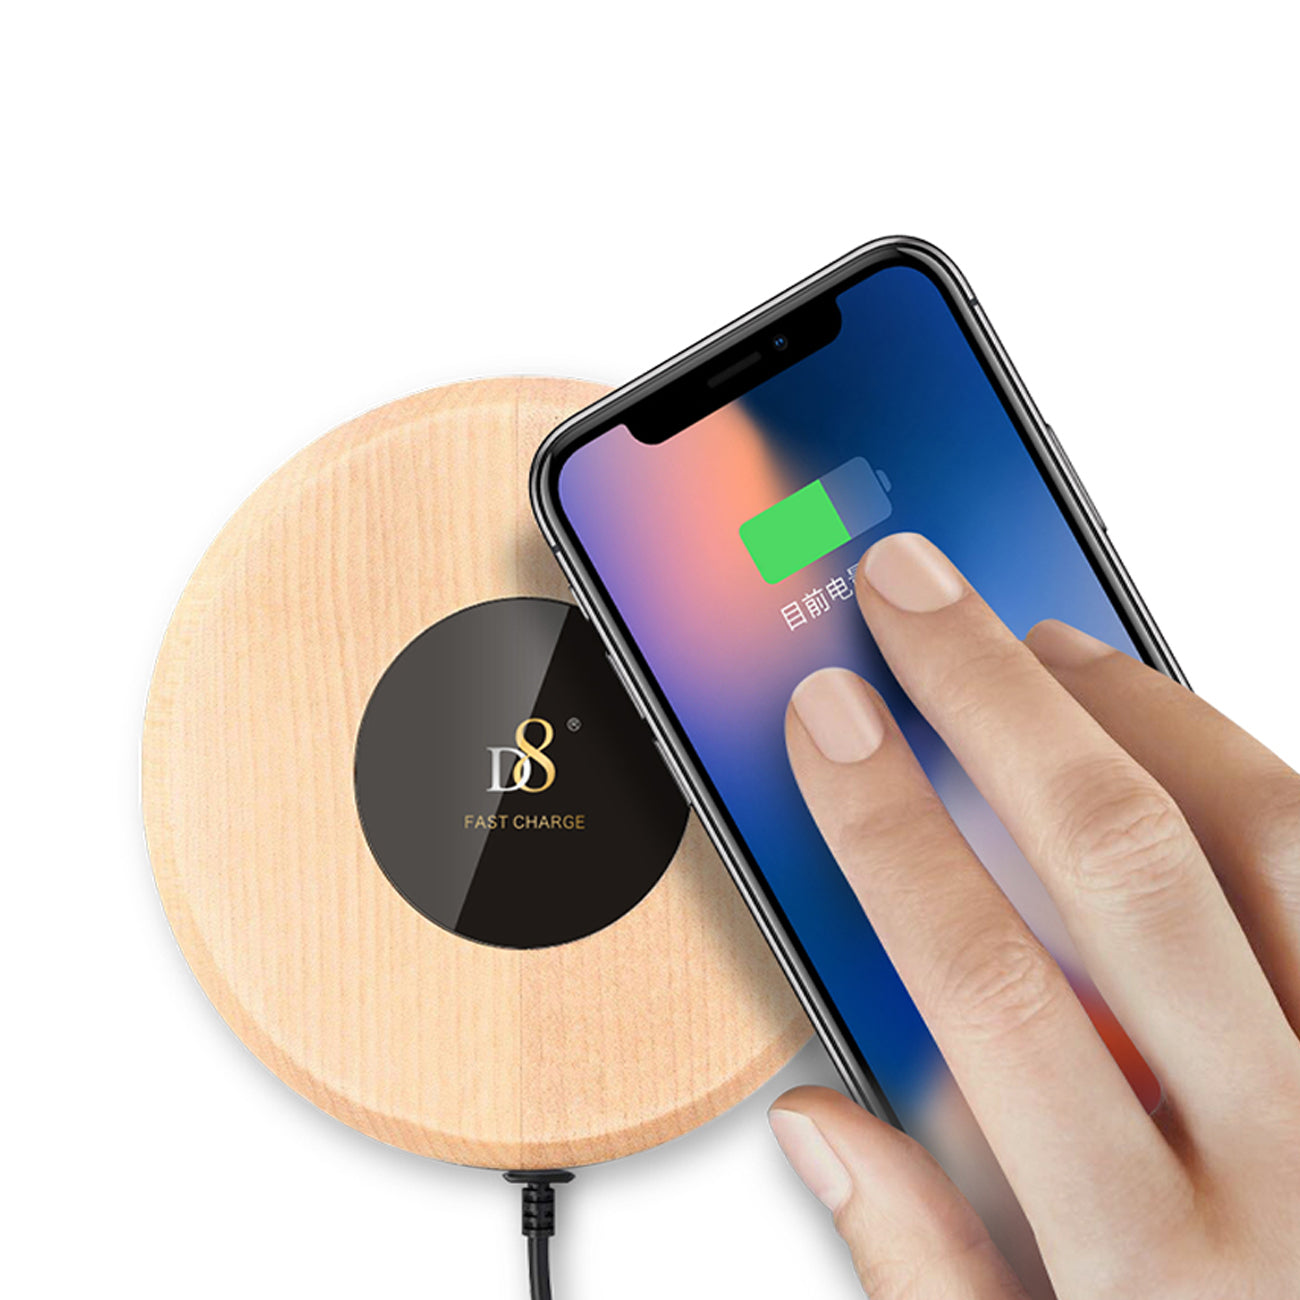 Real Ultra Slim Qi Wireless Charging Pad For iPhone X/ 8/ 8 Plus And More Qi-Enabled Devices